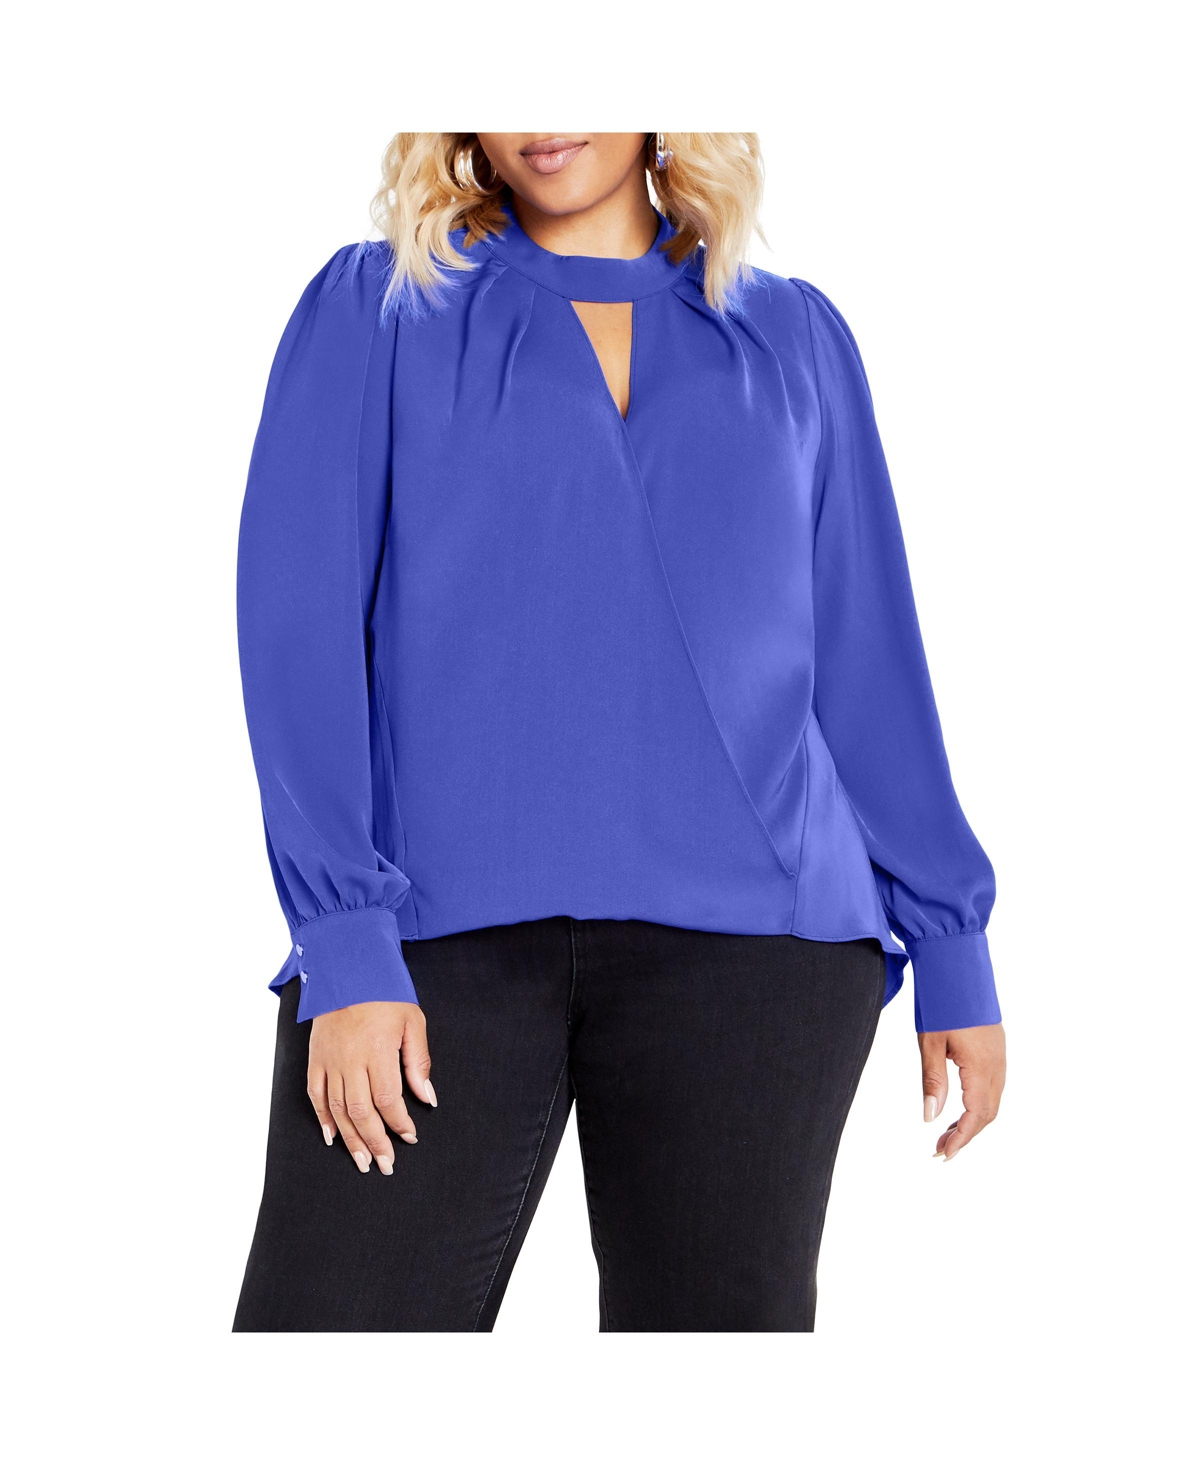 CITY CHIC PLUS SIZE BLAKELY TOP